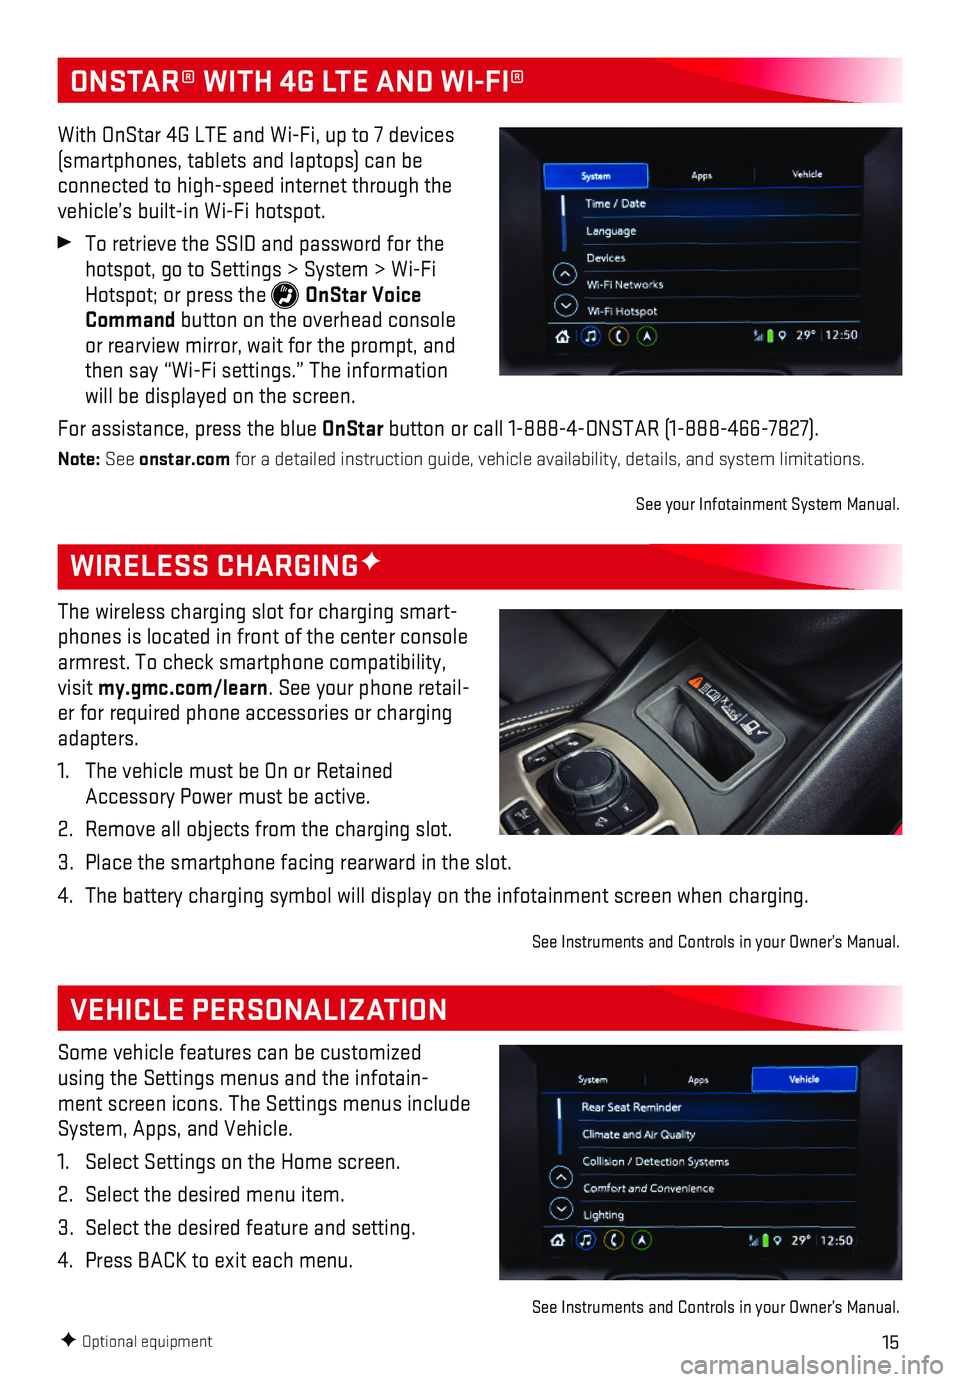 GMC TERRAIN 2018  Get To Know Guide 15F Optional equipment
WIRELESS CHARGINGF
VEHICLE PERSONALIZATION
The wireless charging slot for charging smart-phones is located in front of the center console armrest. To check smartphone compatibil